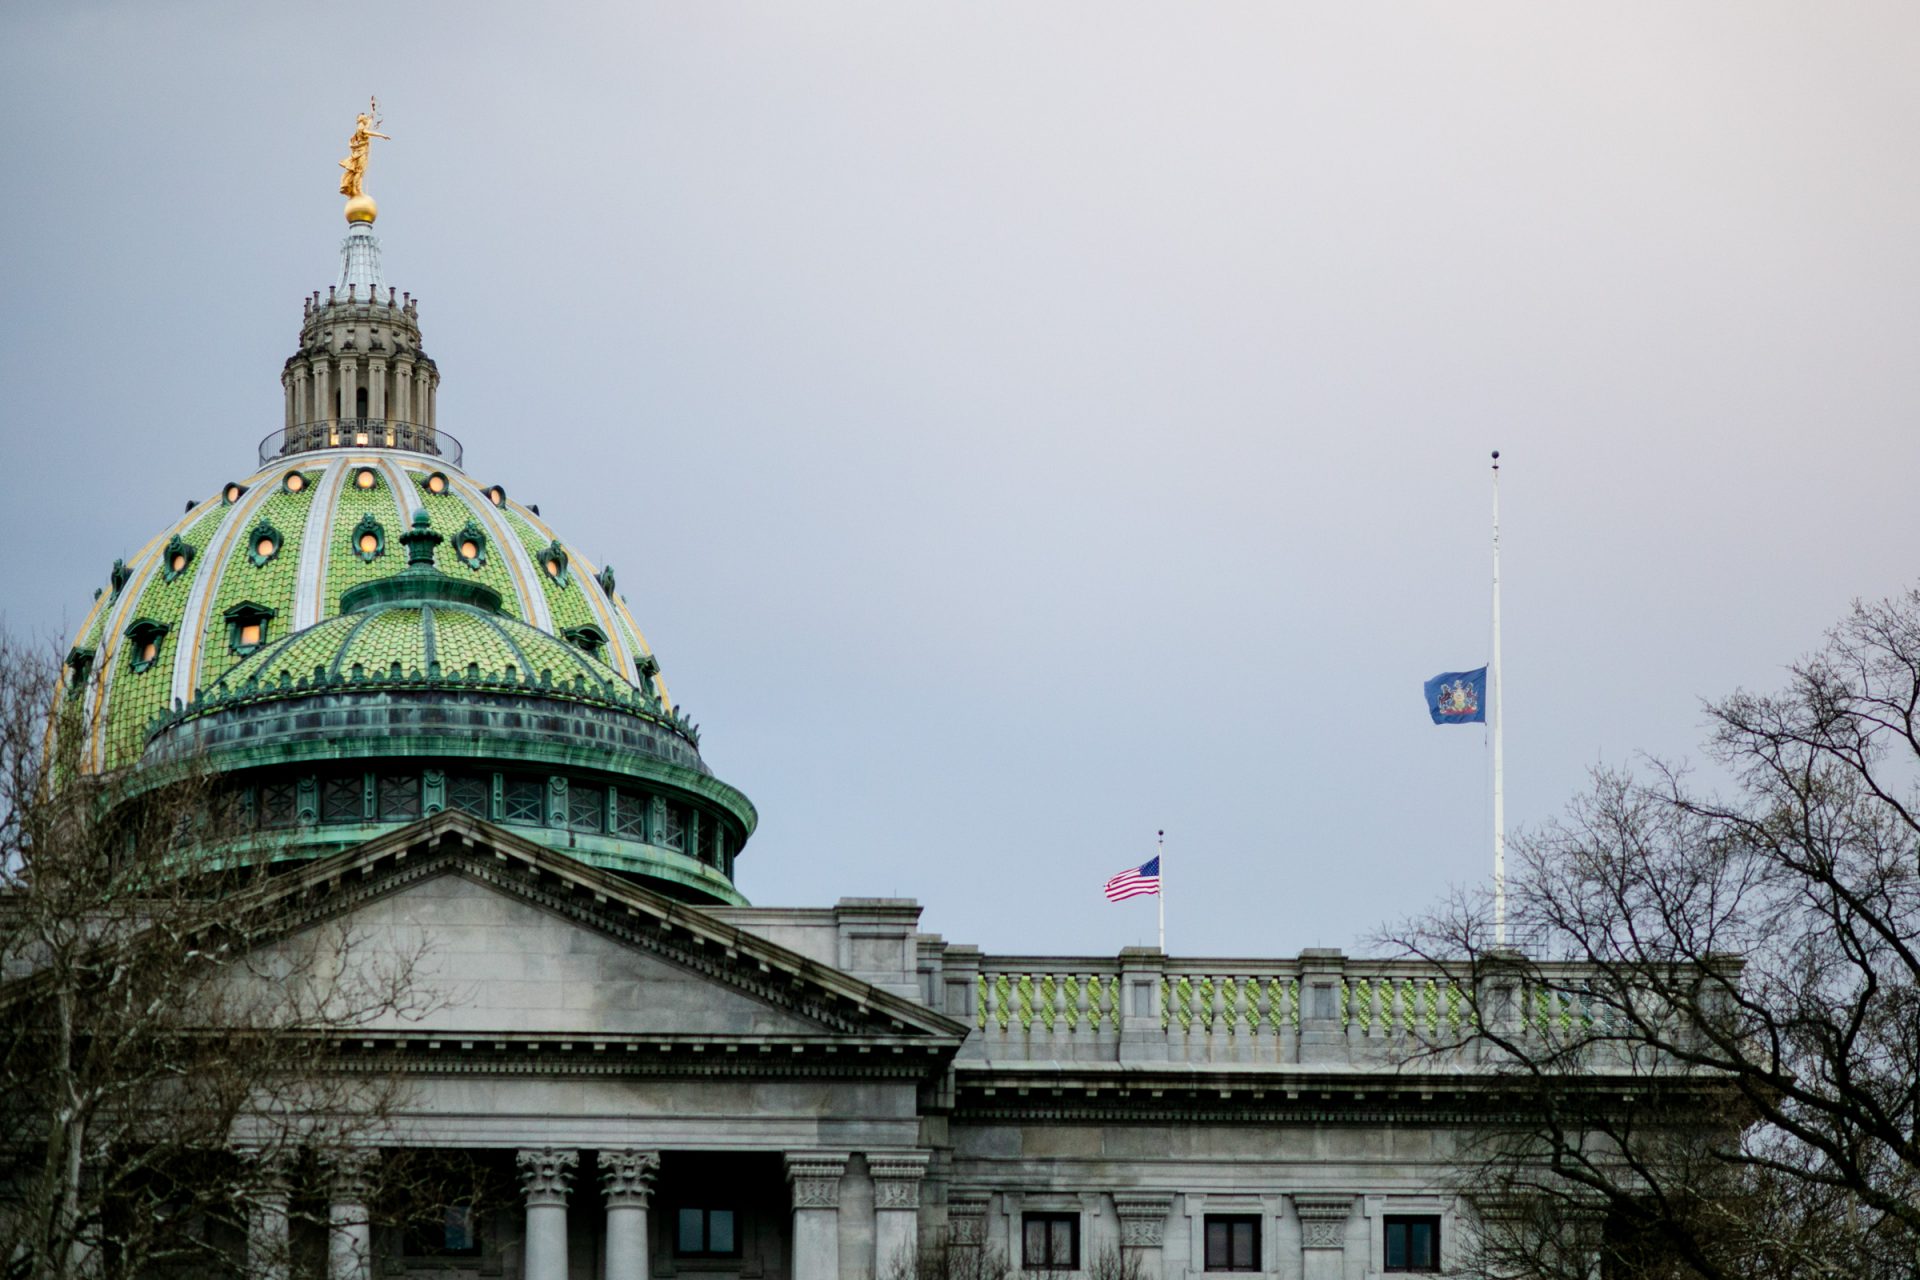 Pa. flag at half-staff atop capitol building